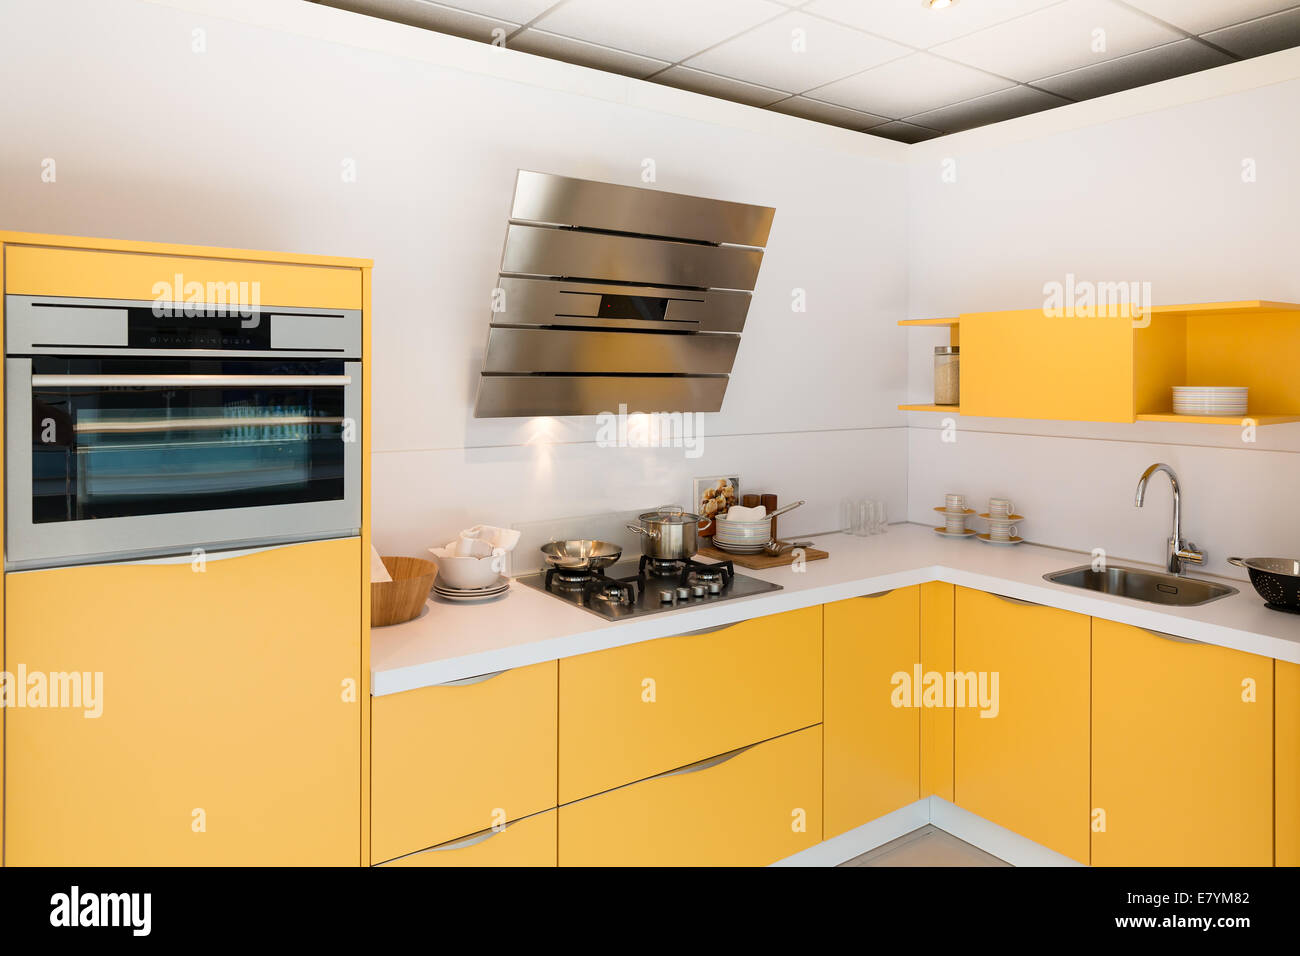 Modern yellow kitchen with steel oven and hood Stock Photo